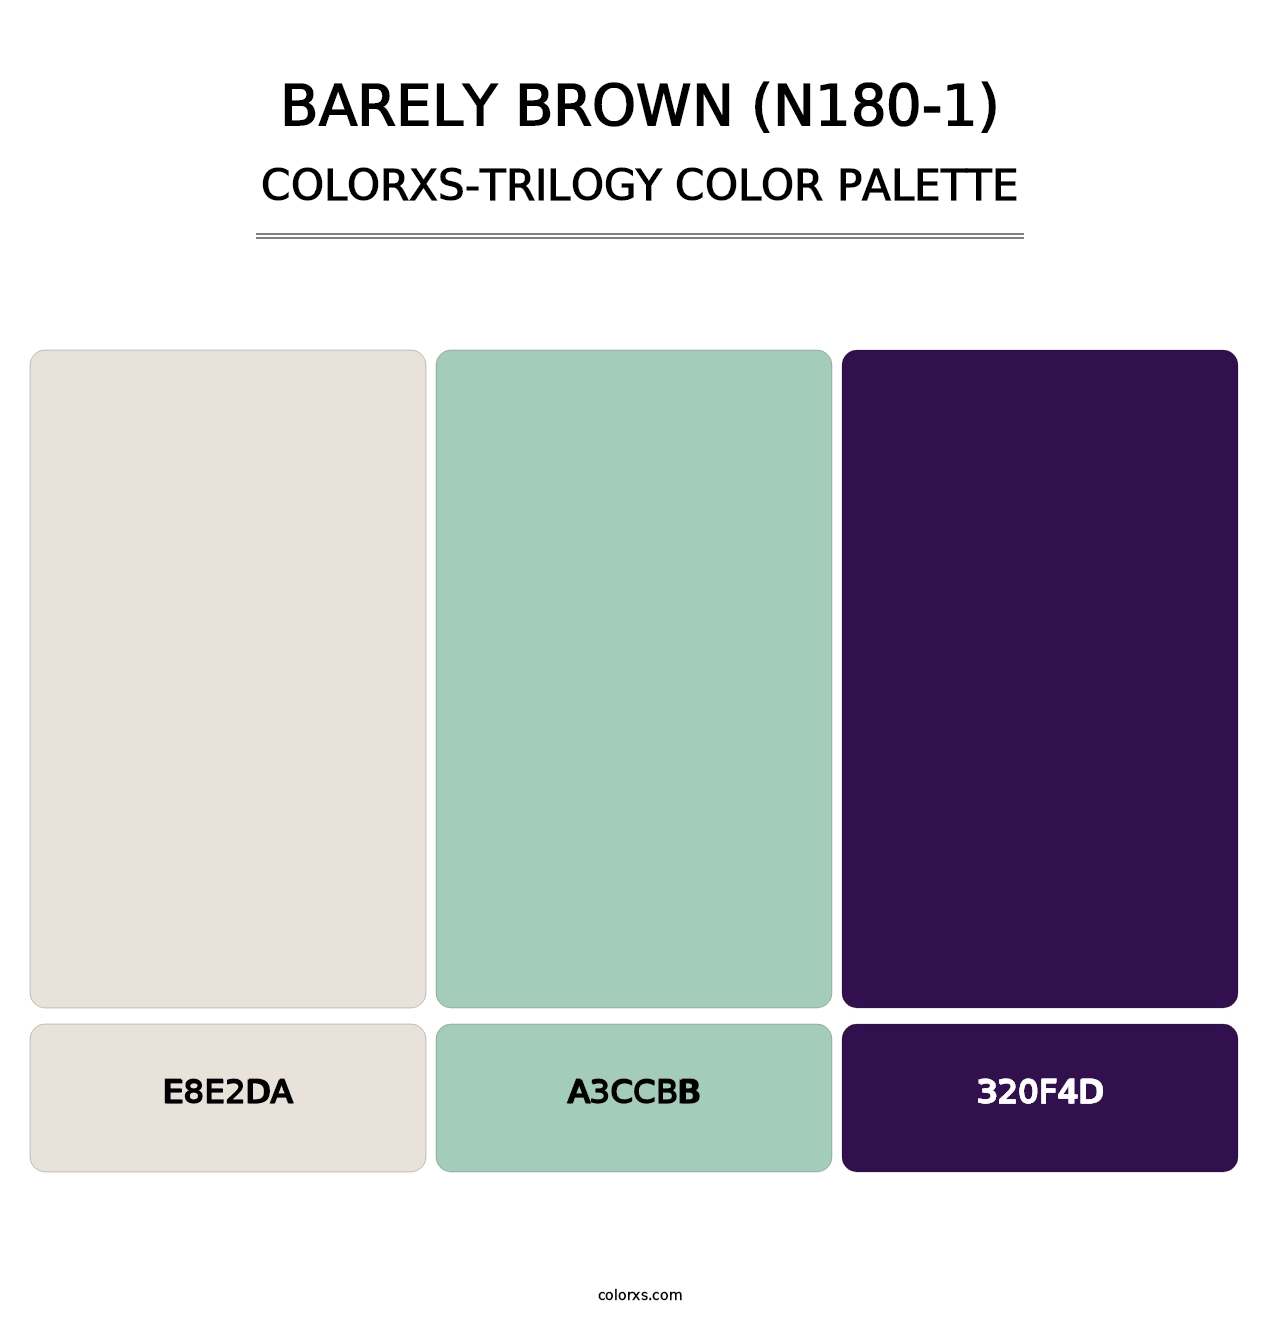 Barely Brown (N180-1) - Colorxs Trilogy Palette